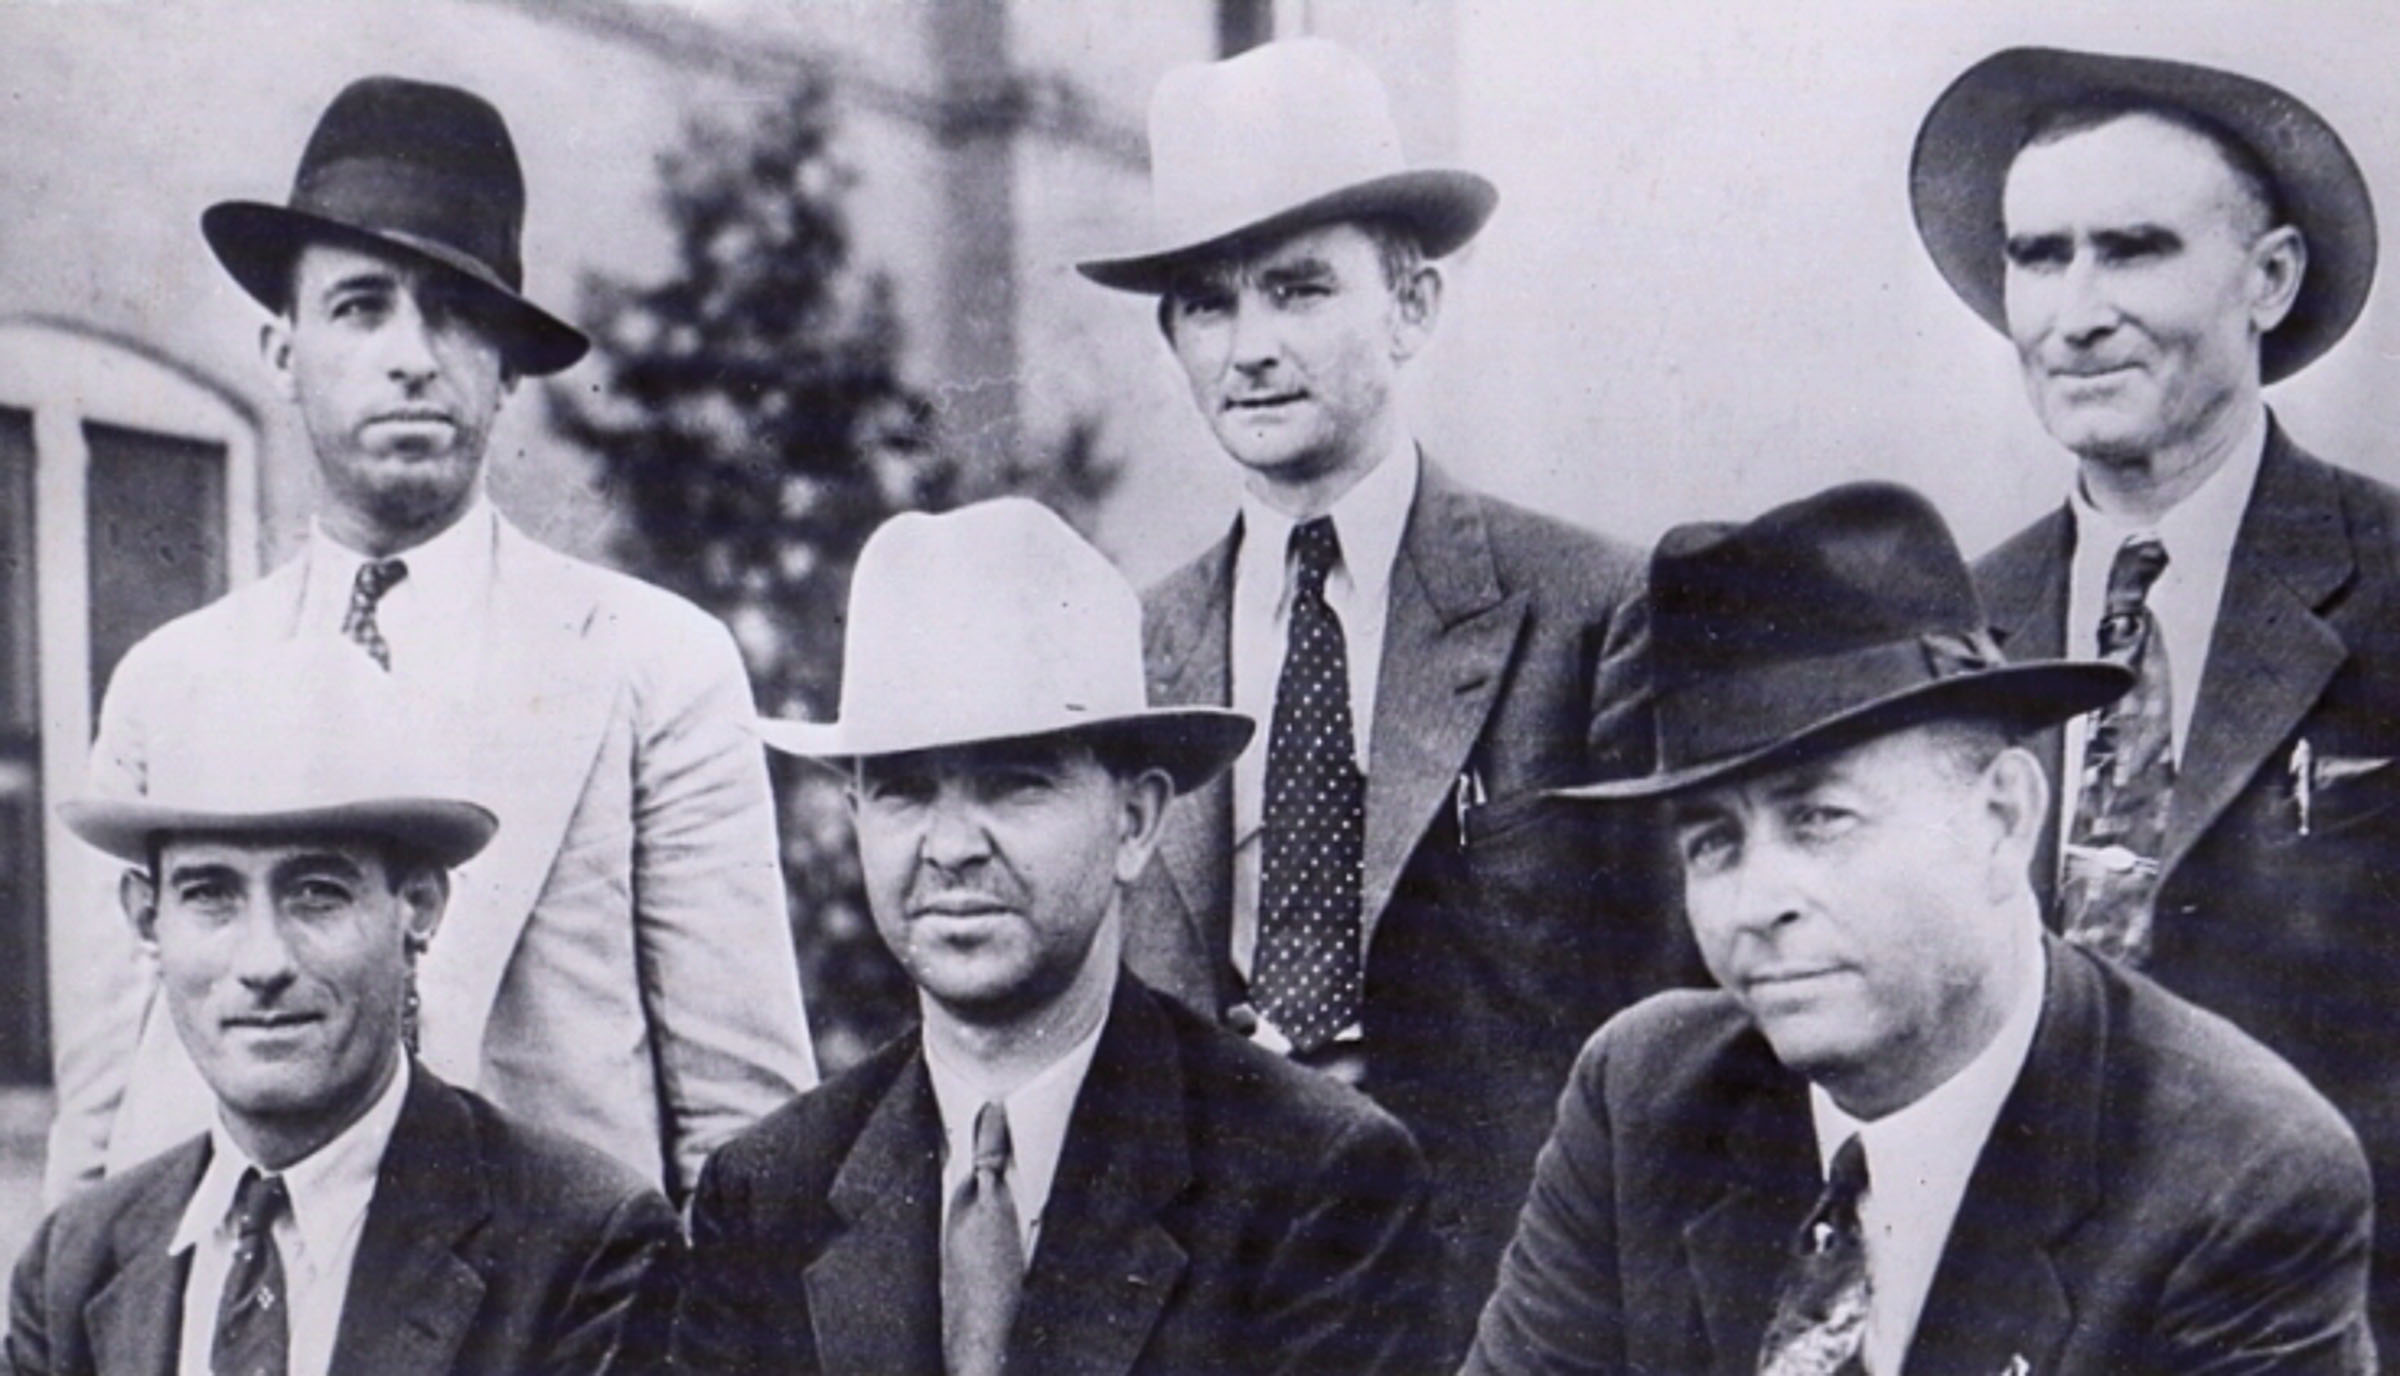 A group of men in hats pose in this historic photo